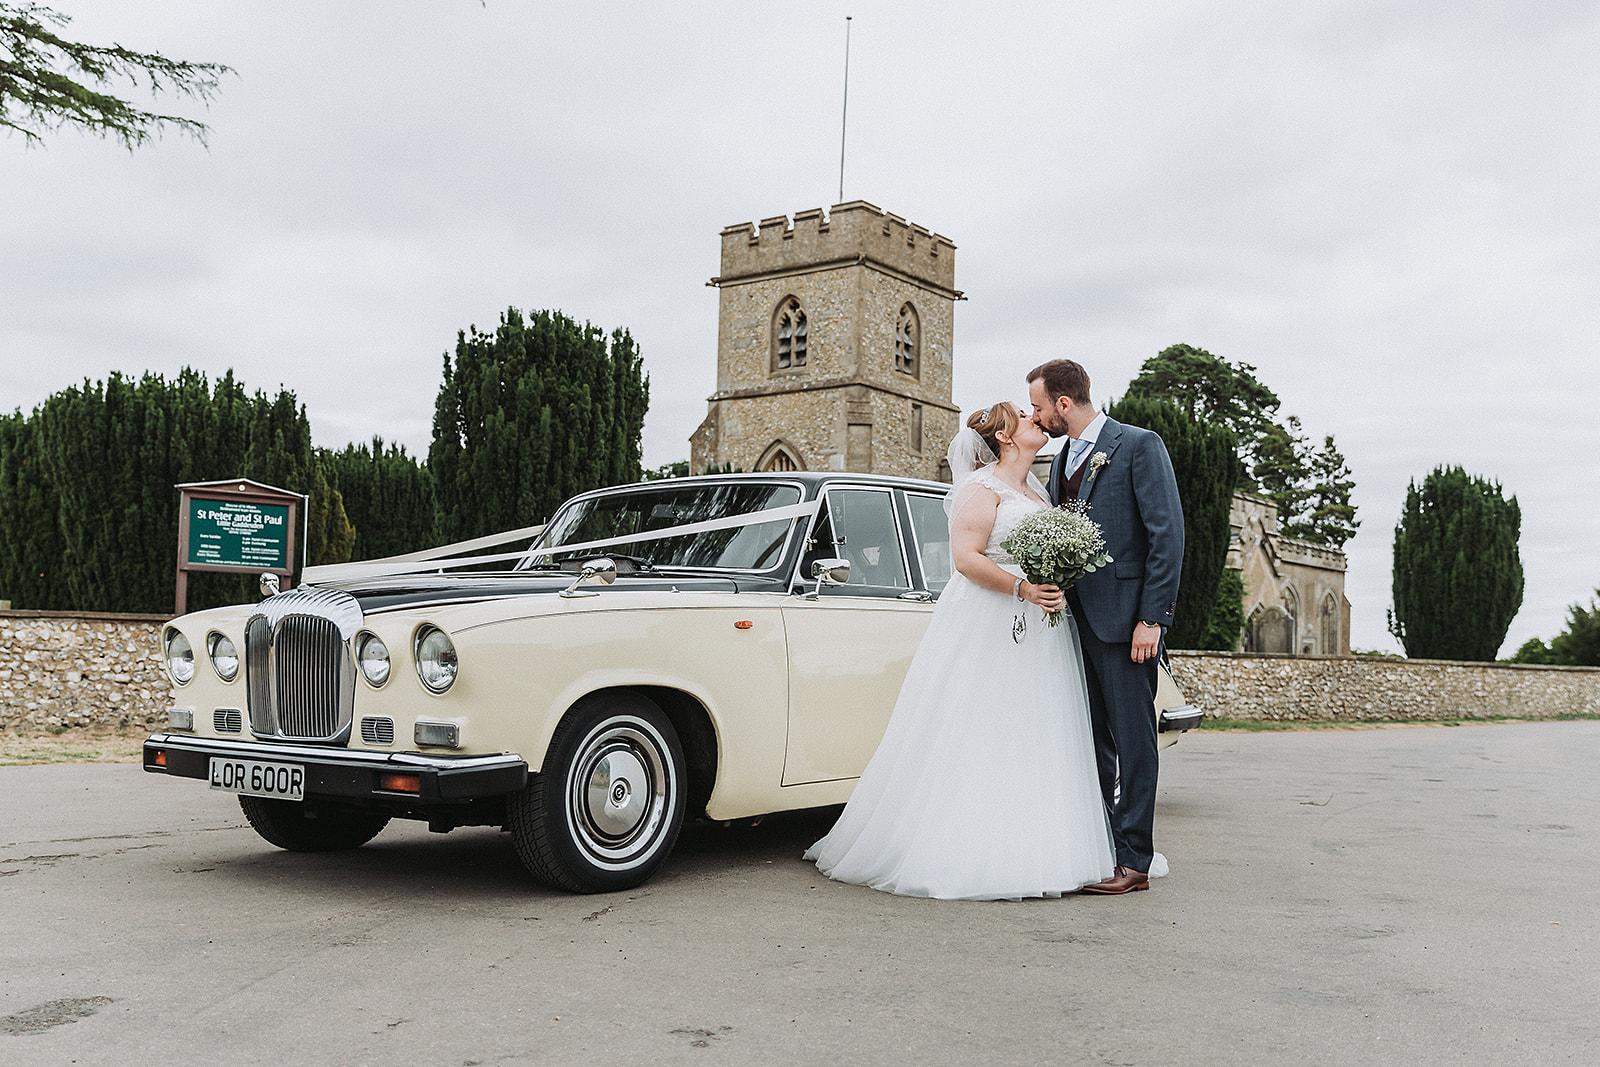 Bride and groom with the wedding car from Lord Cars outside little gaddesden church wedding photo